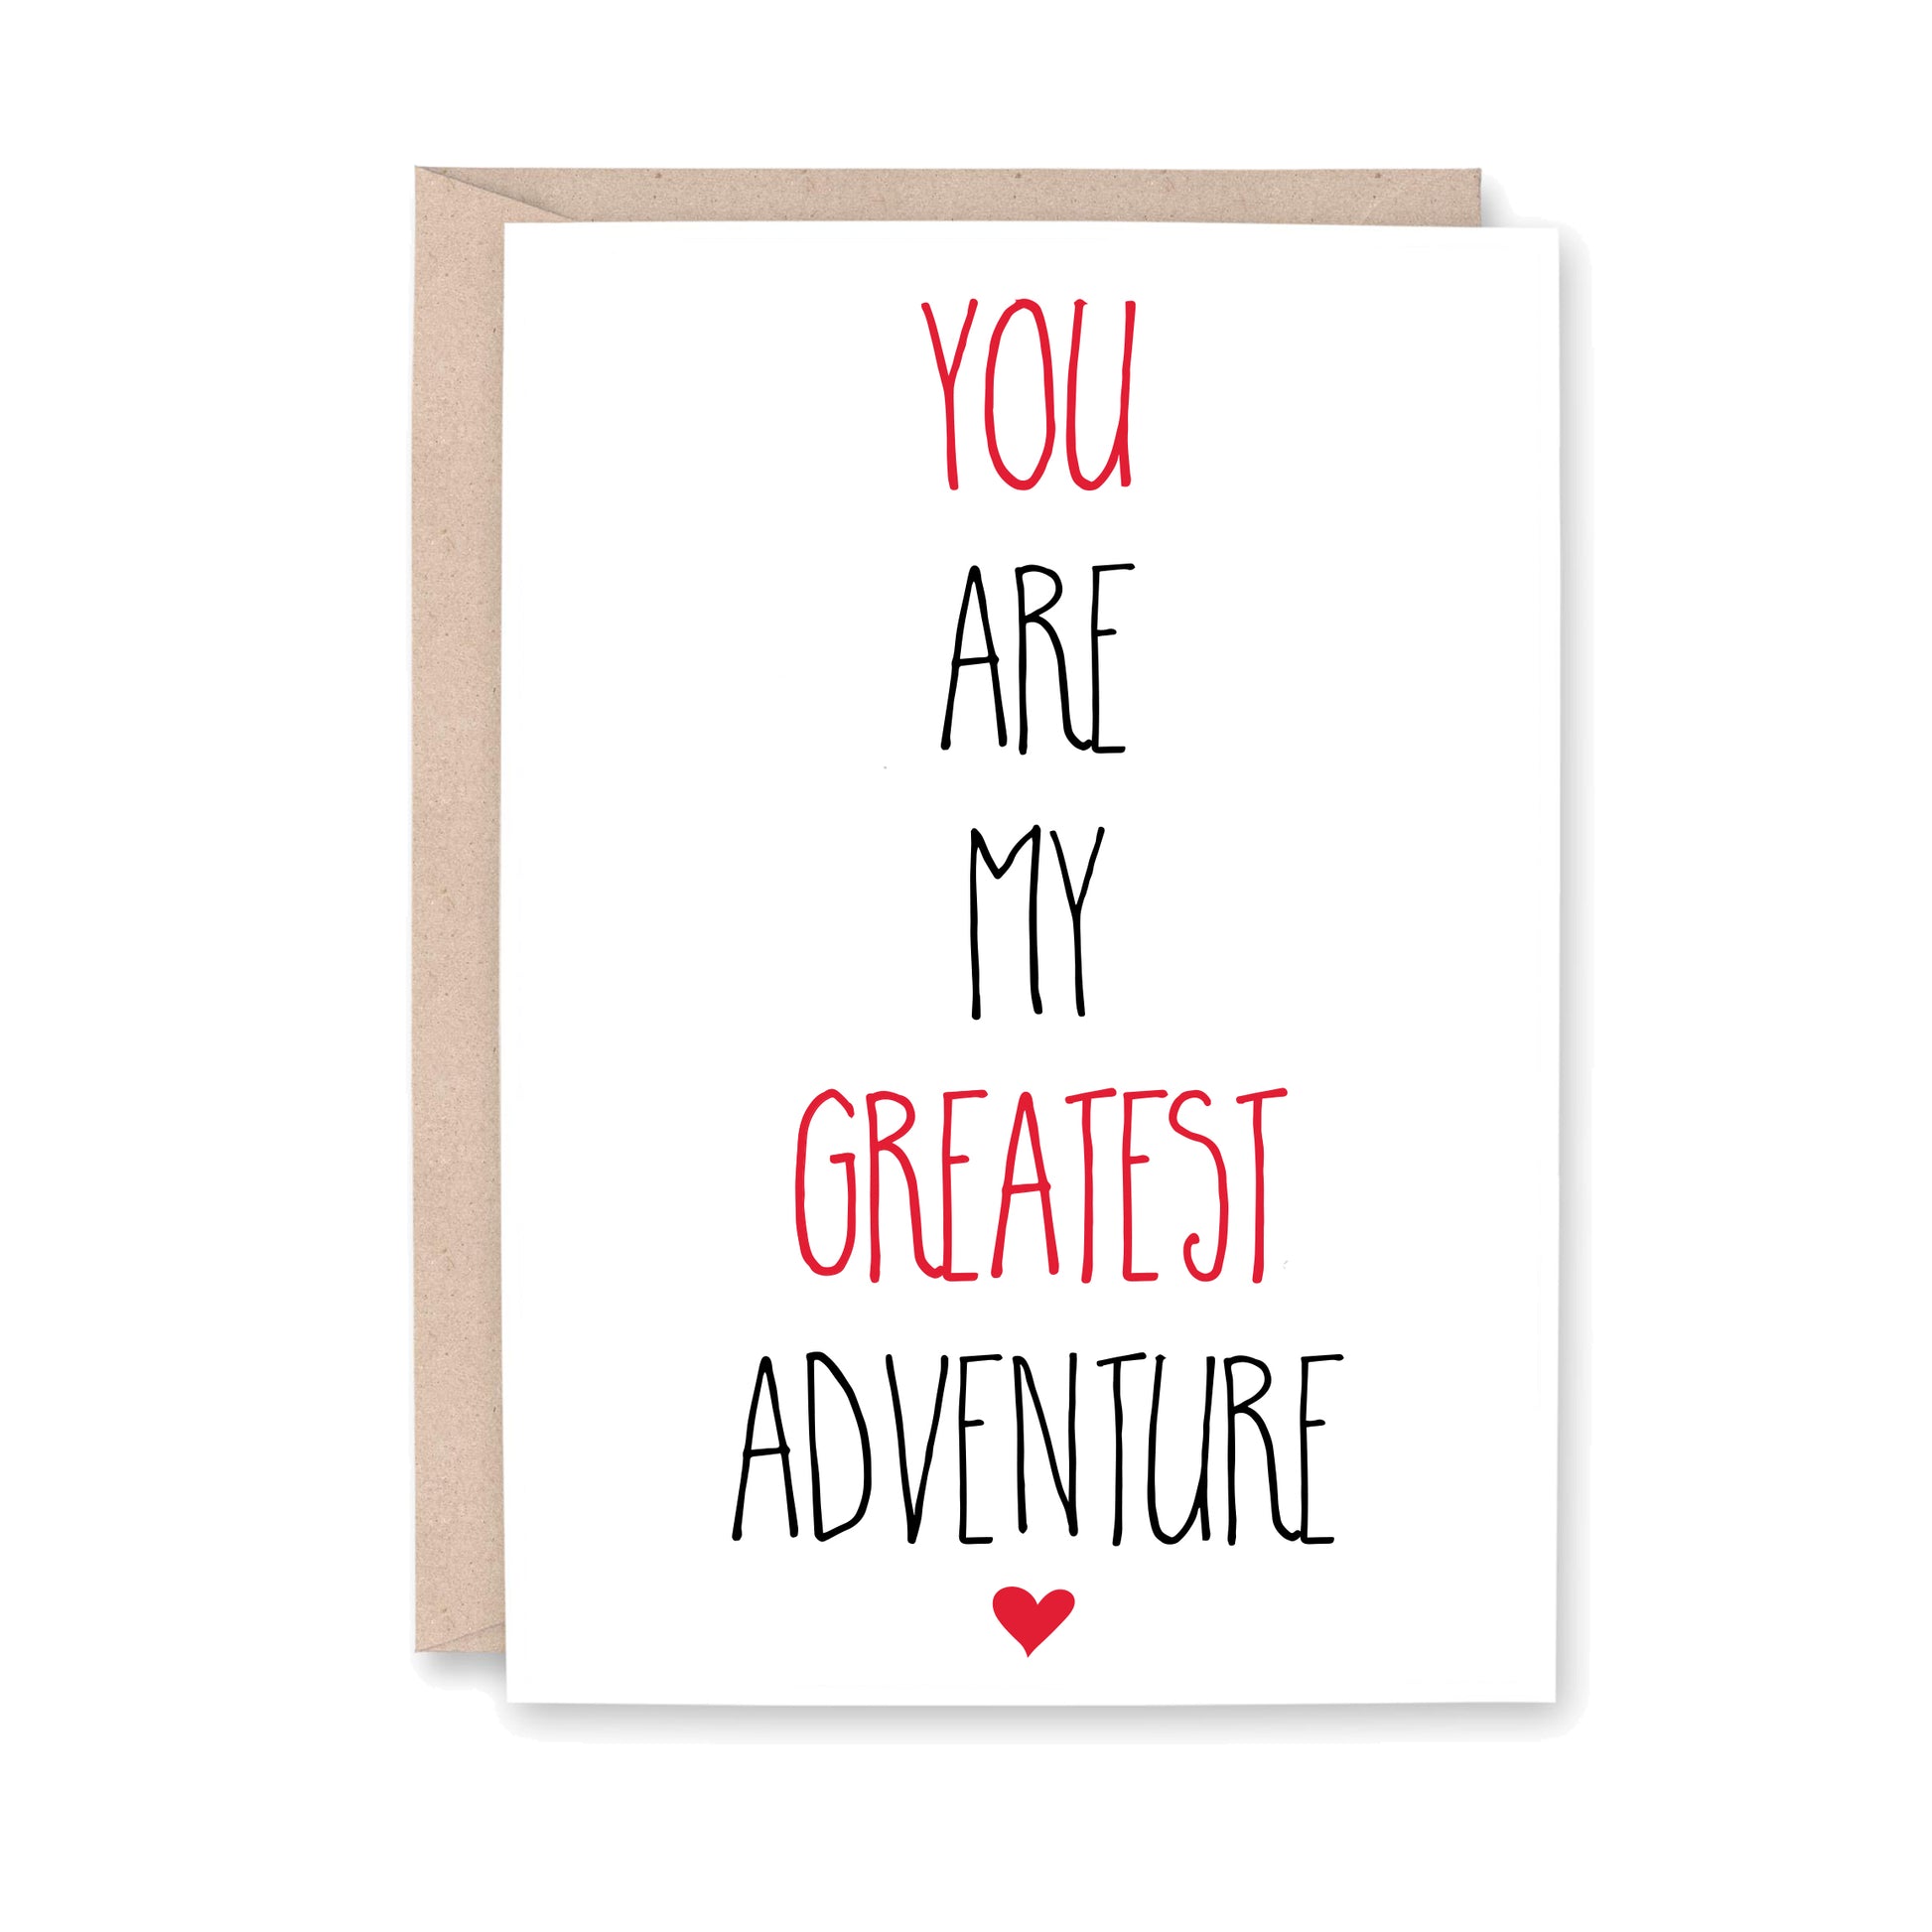 You are my greatest adventure card with a small red heart